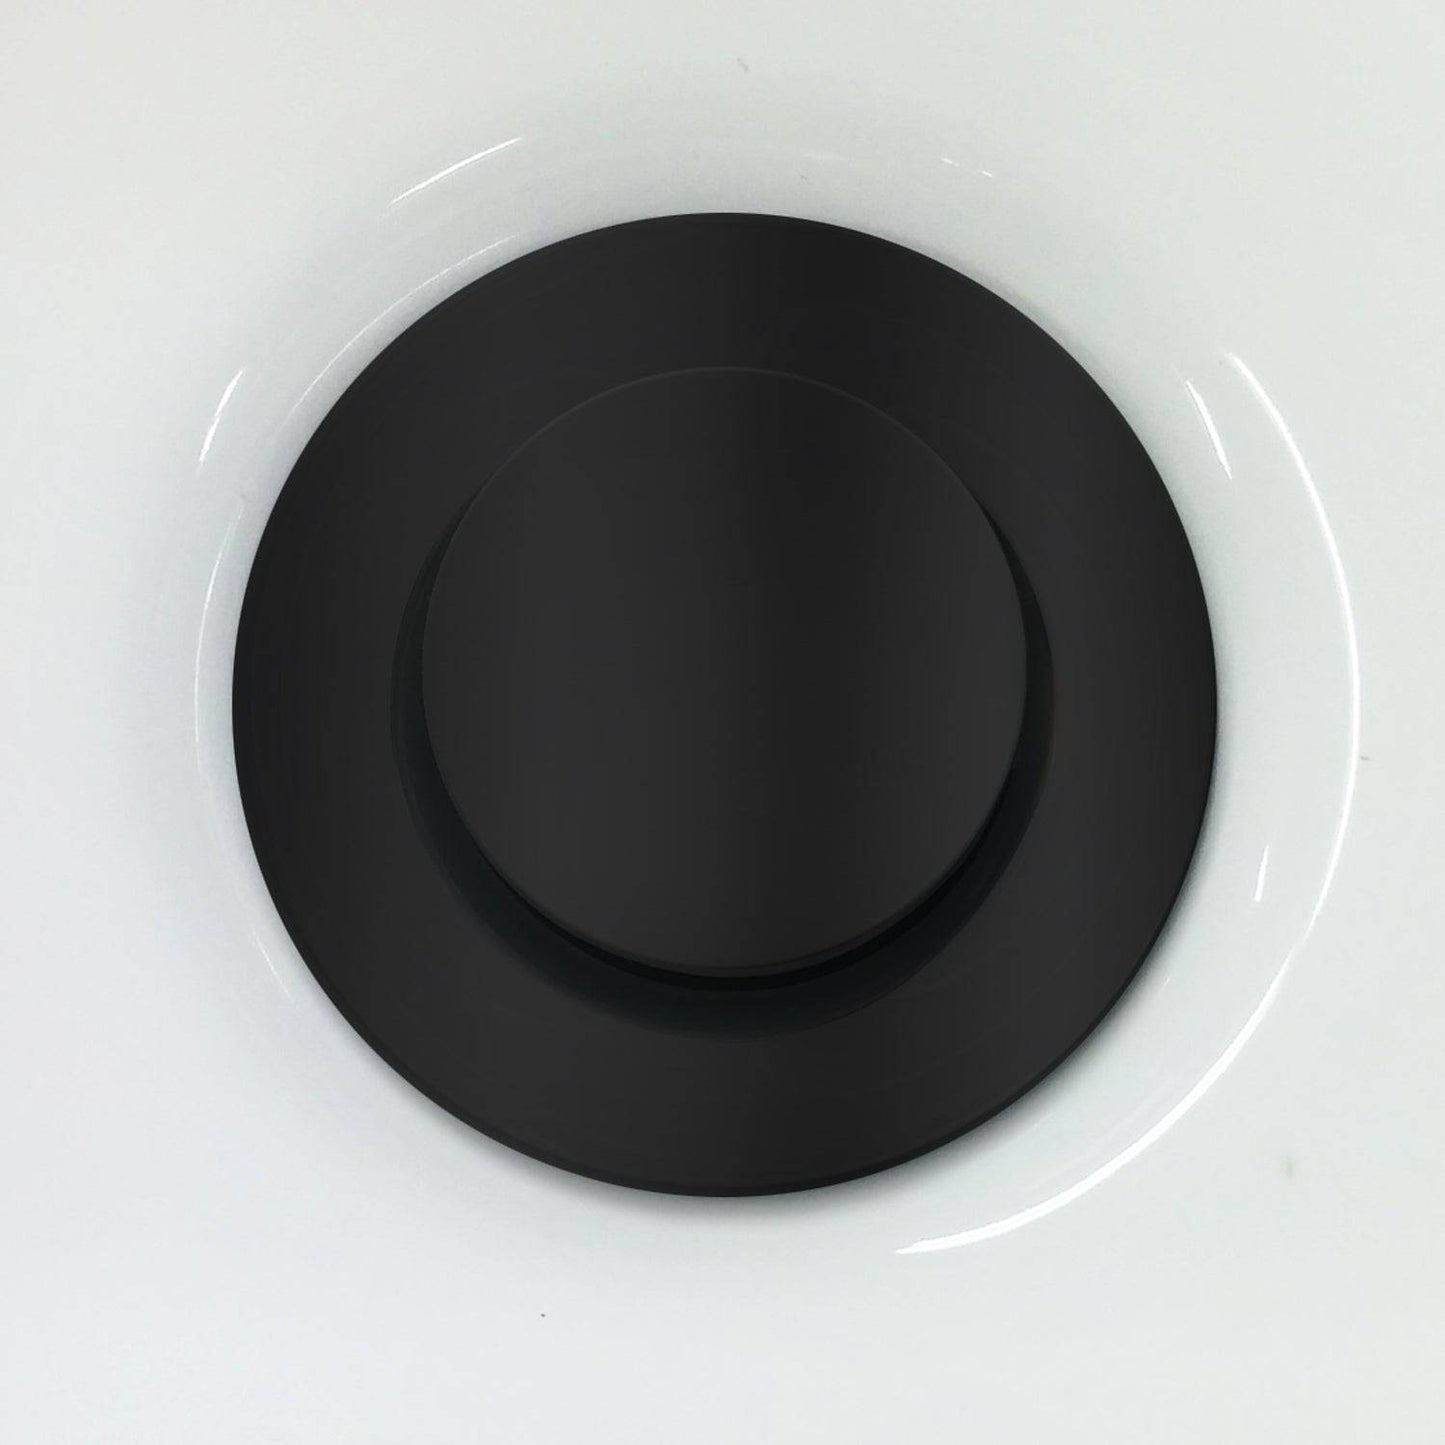 Kalia Pop Up Drain With Overflow Assembly with 35.5mm Cap- Matte Black